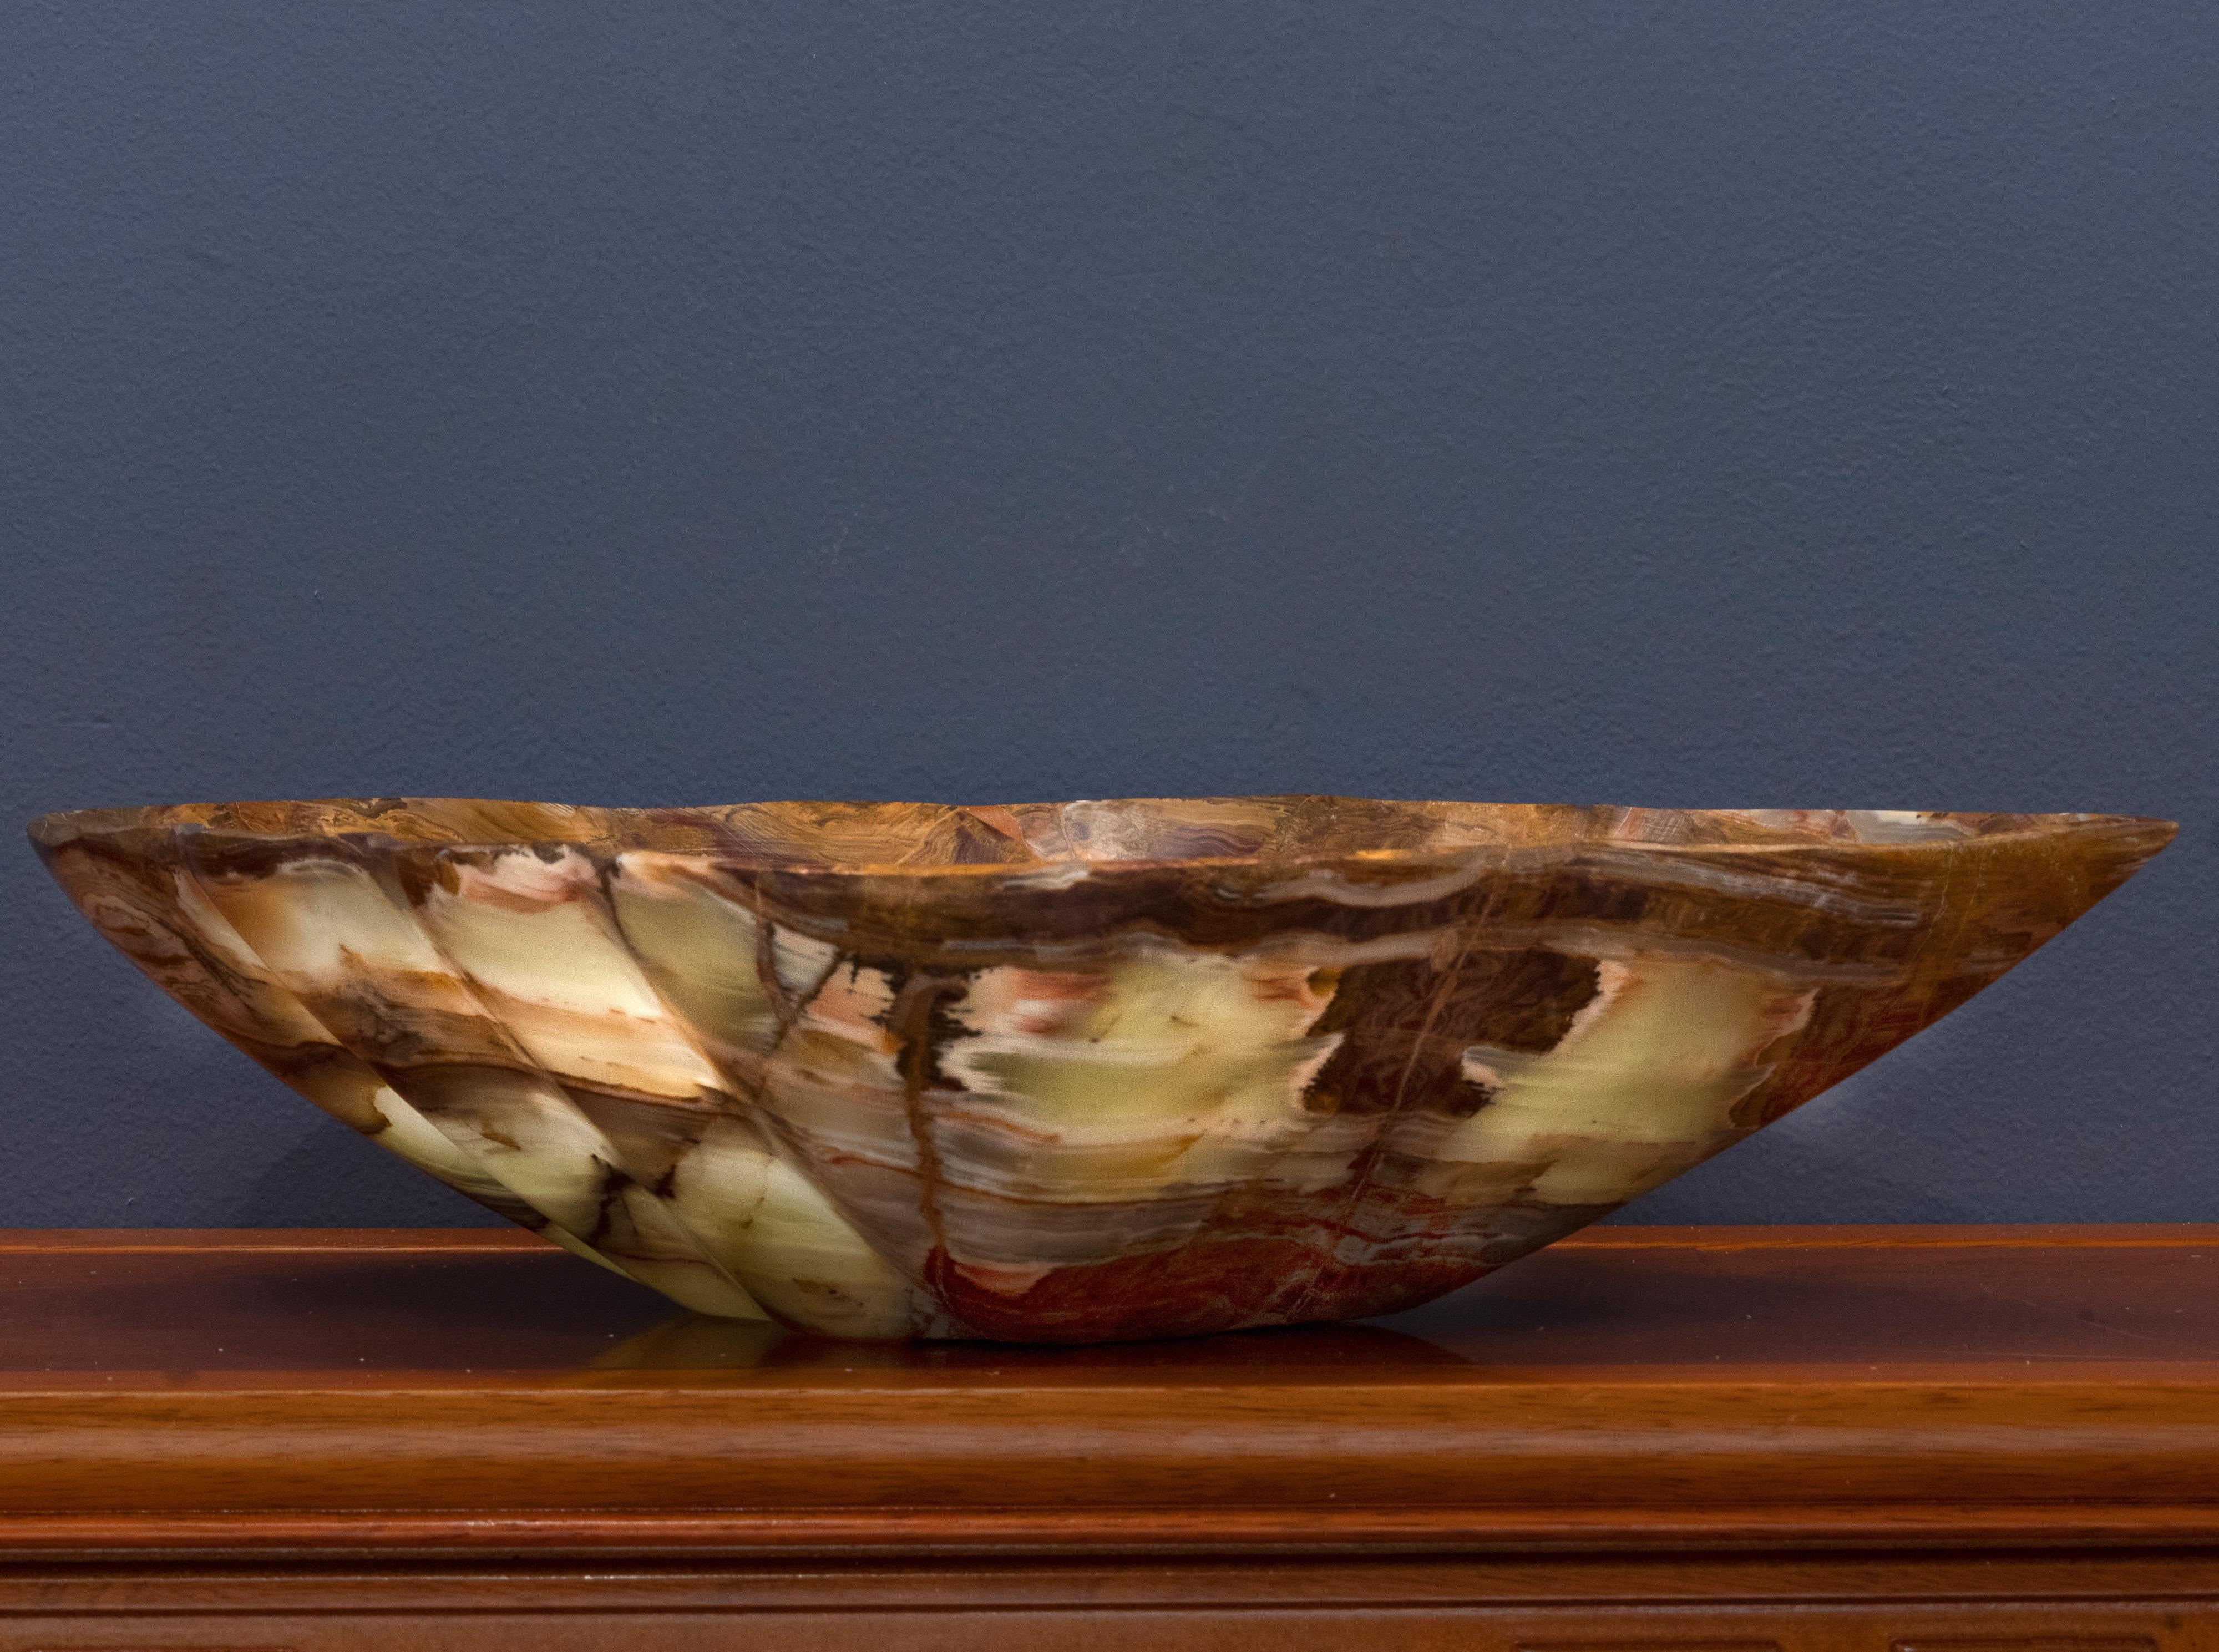 This hand-carved 7.5 pound banded onyx freeform bowl from Pakistan features gorgeously pigmented, earthy banding and veining in shades of brown, green, and tan. A visually arresting way to bring nature into your everyday and onto your dining room